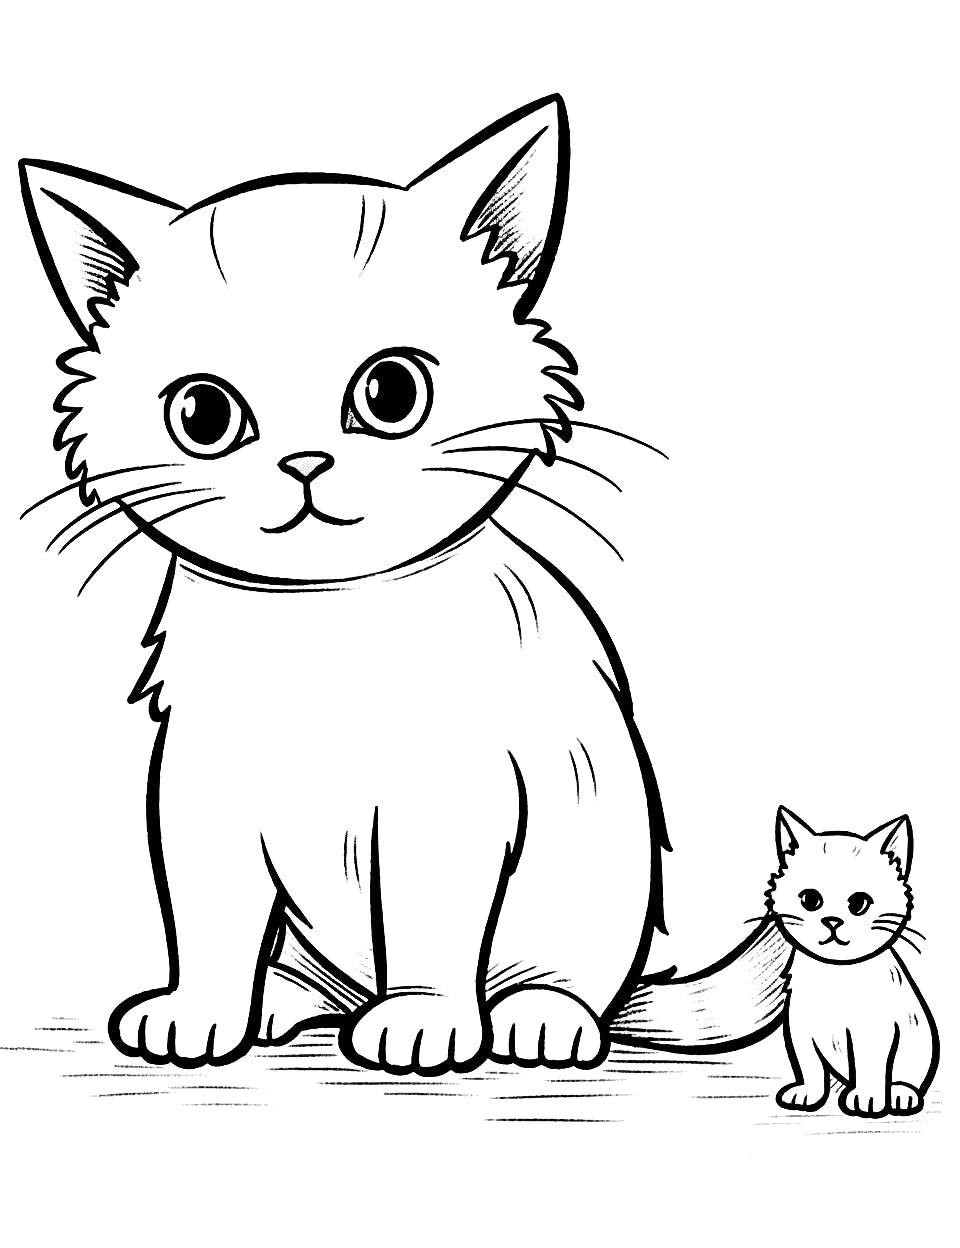 Experience the Whimsy of Cat Coloring Pages in Imaginary Realms